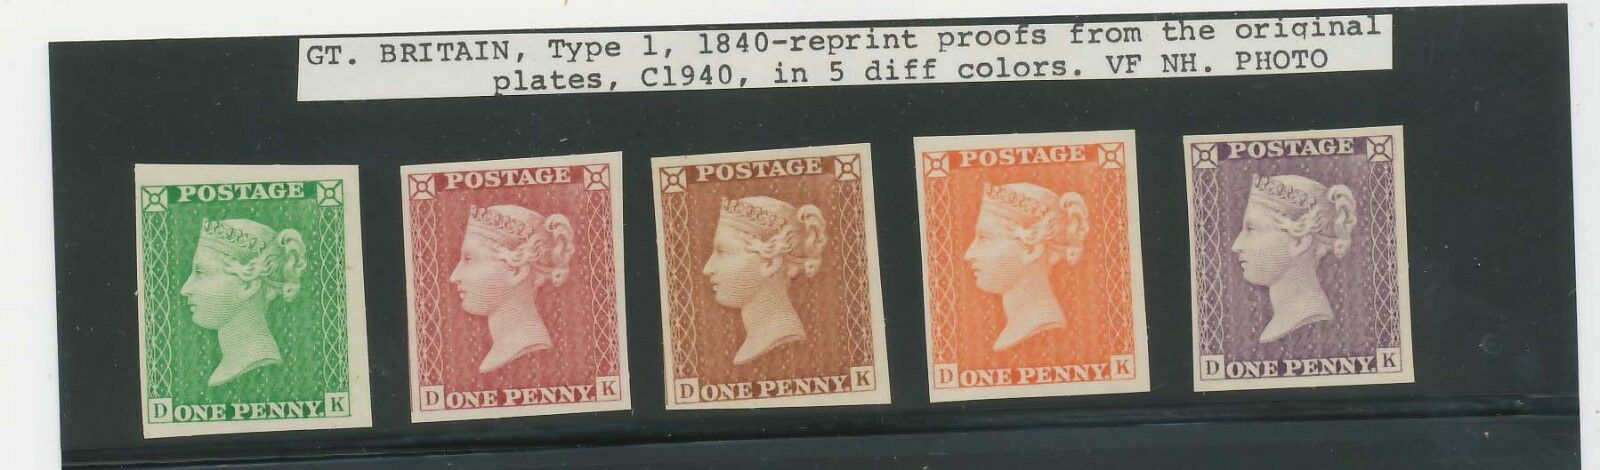 A1 - GREAT BRITAIN TYPE 1 1840 REPRINT PROOFS FROM THE ORIGINAL PLATES, 5 DIFF